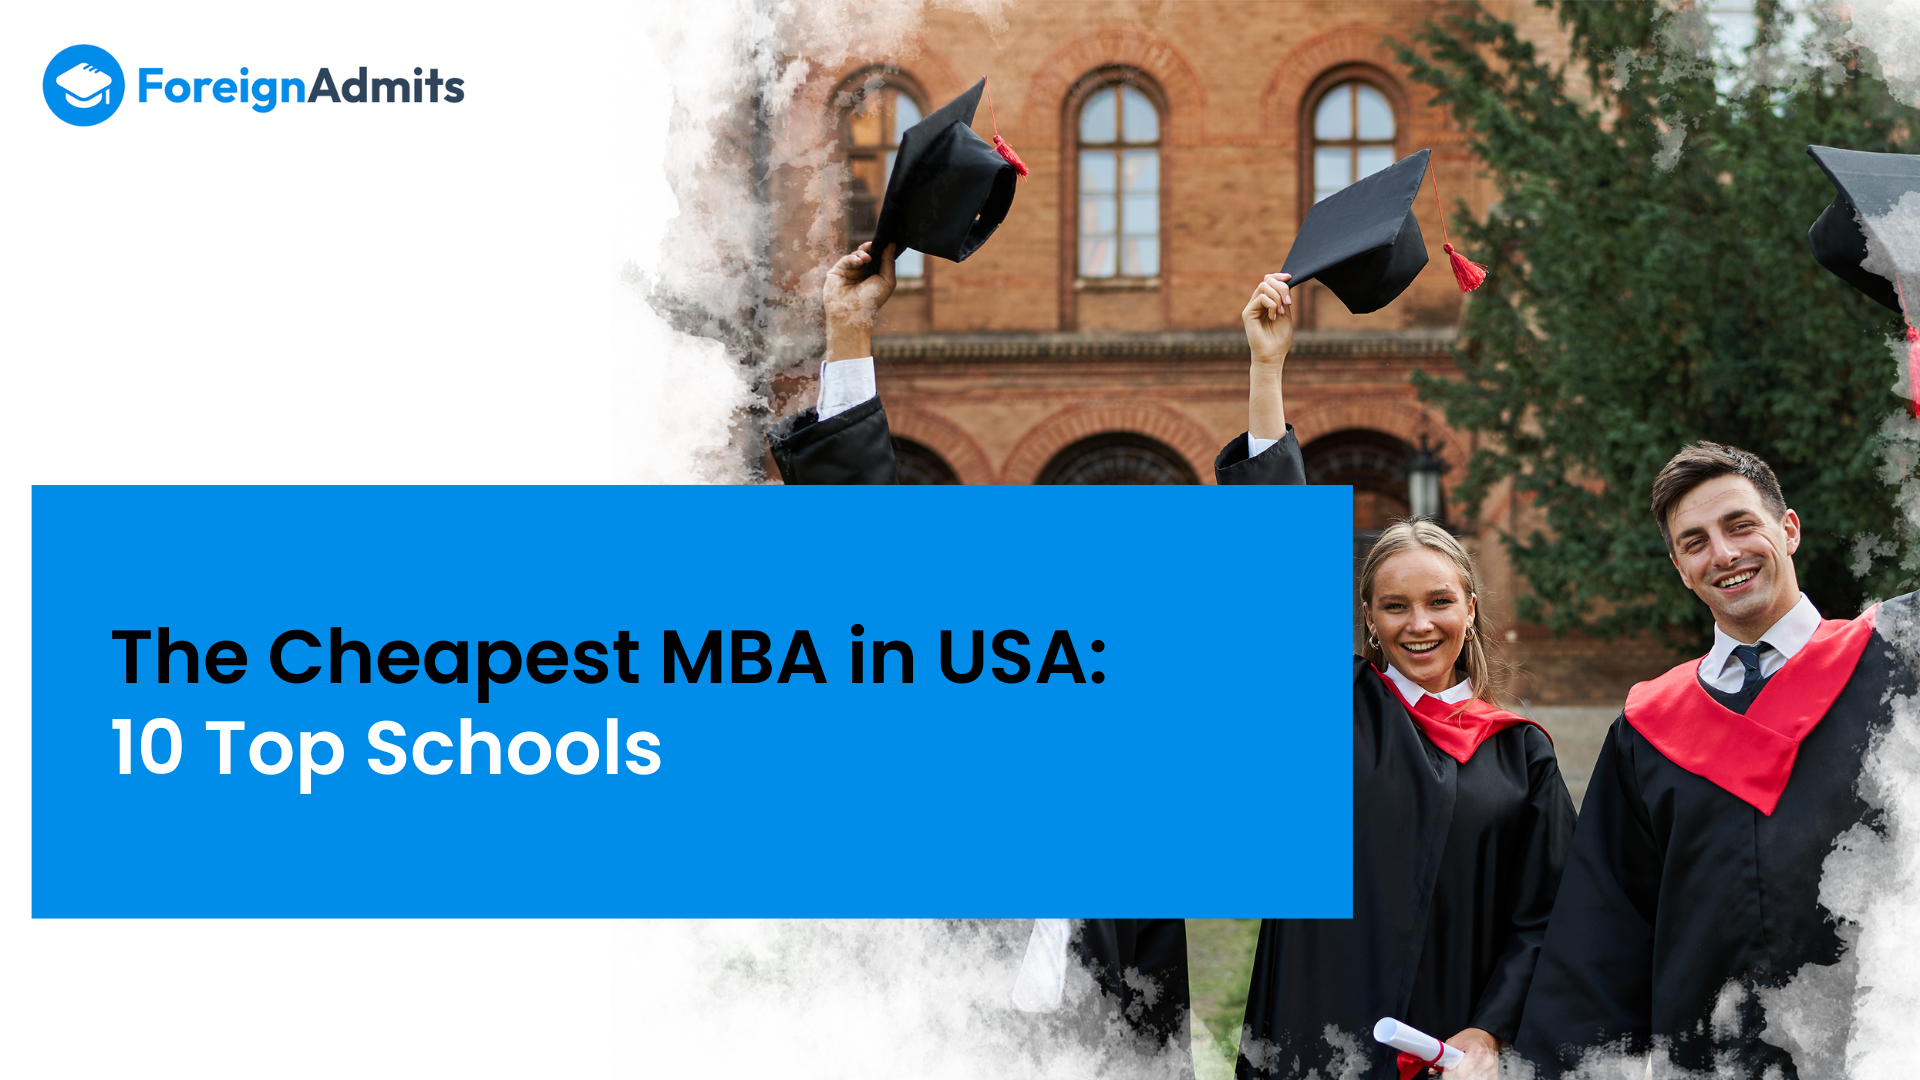 The Cheapest MBA in USA: 10 Top Schools